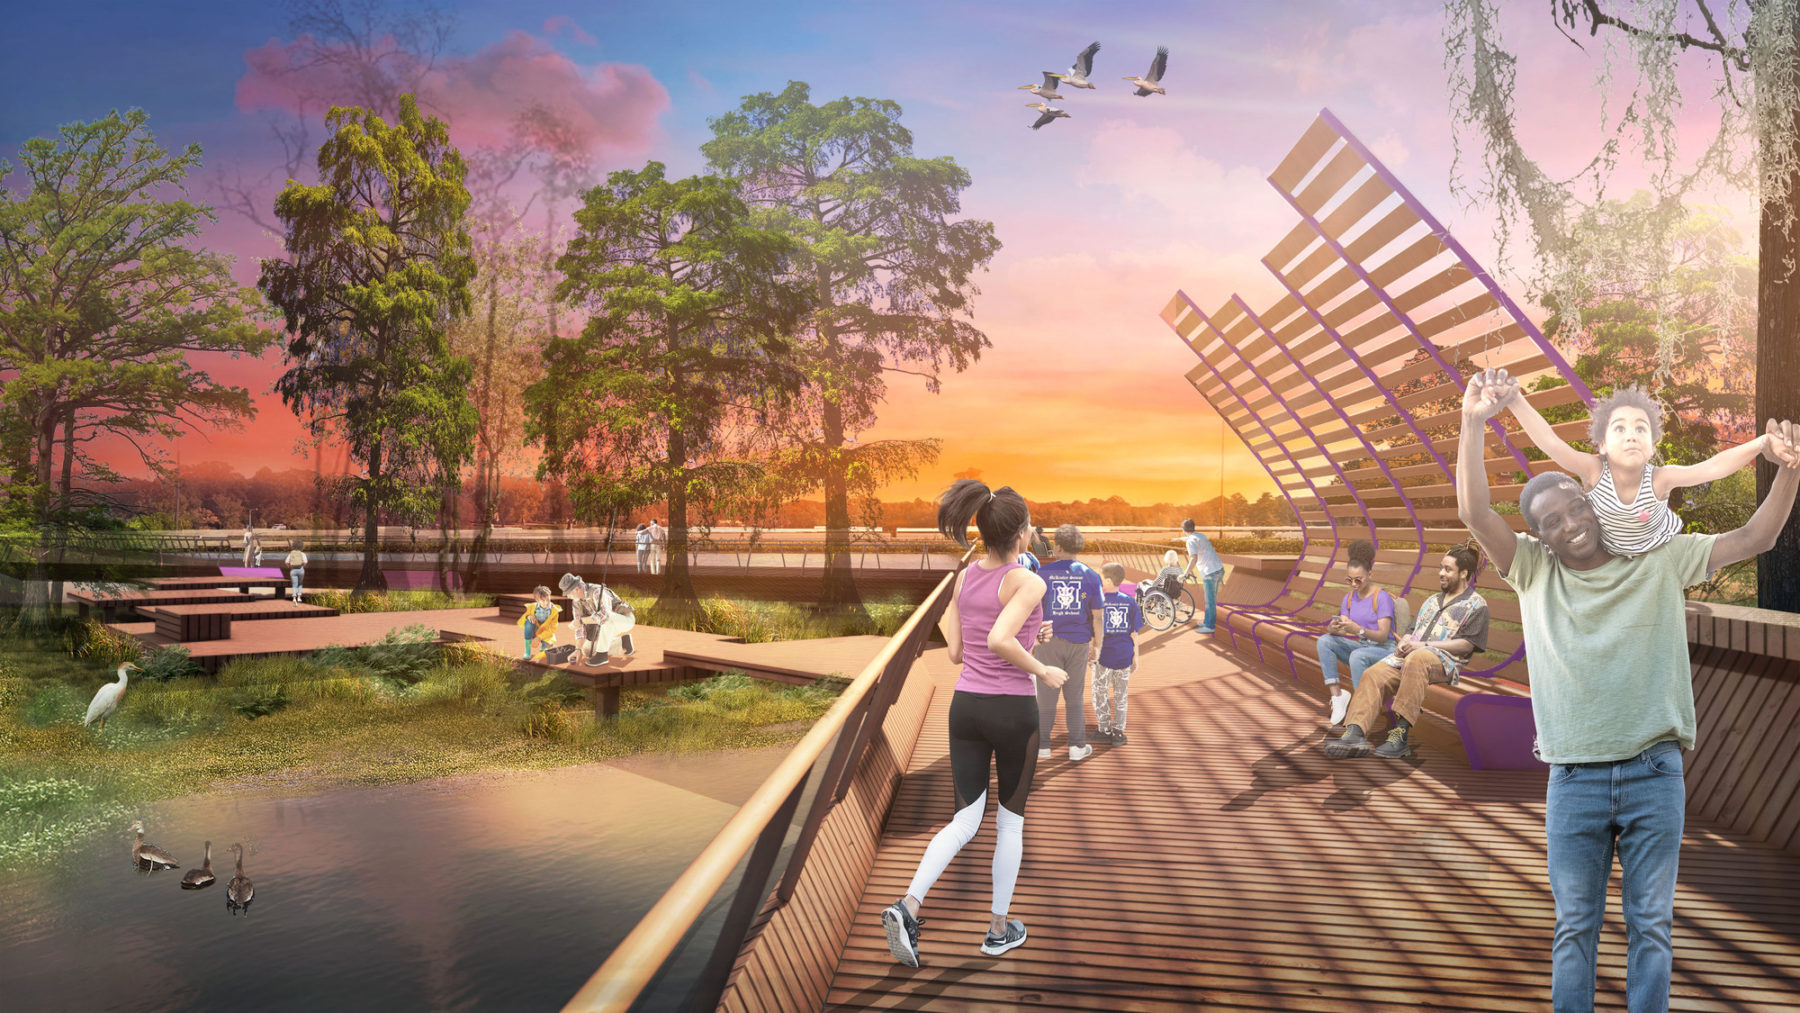 rendering of site vision with people running and walking along a boardwalk